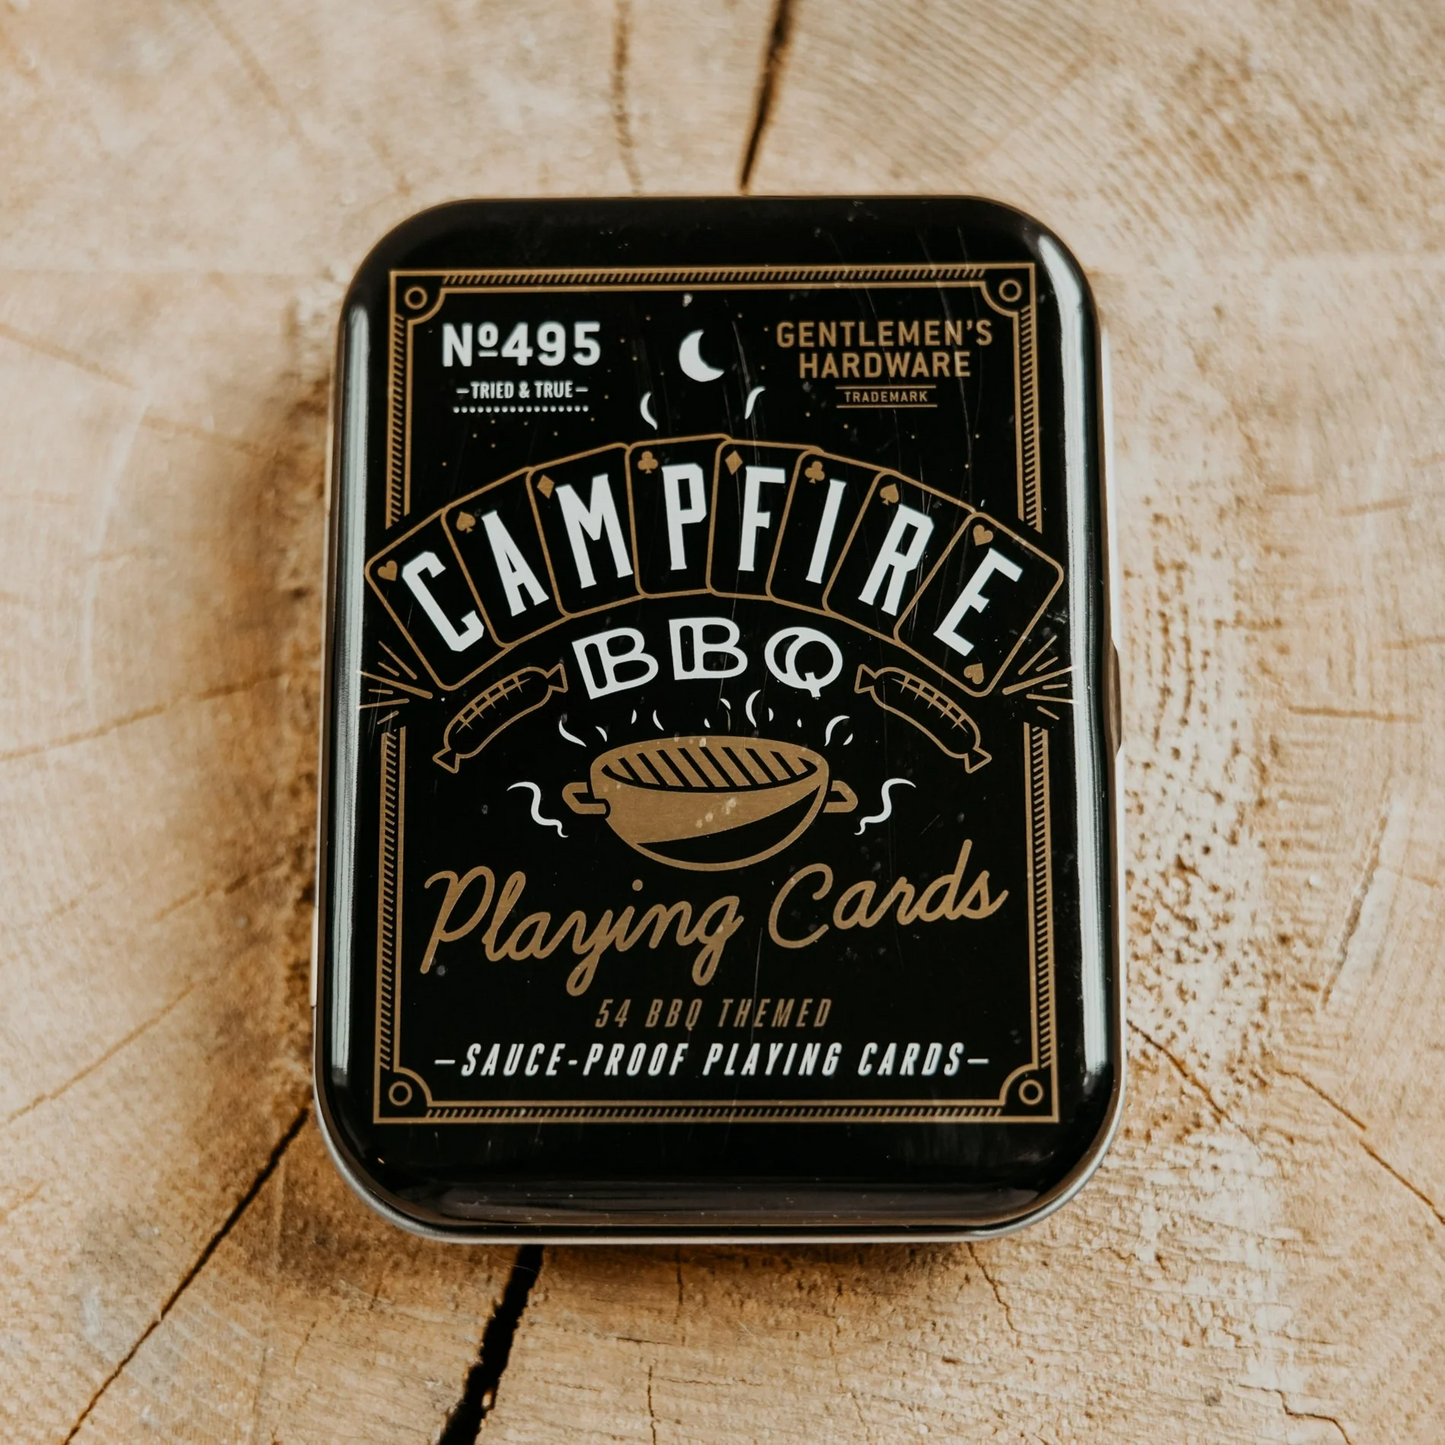 Campfire BBQ Waterproof Playing Cards